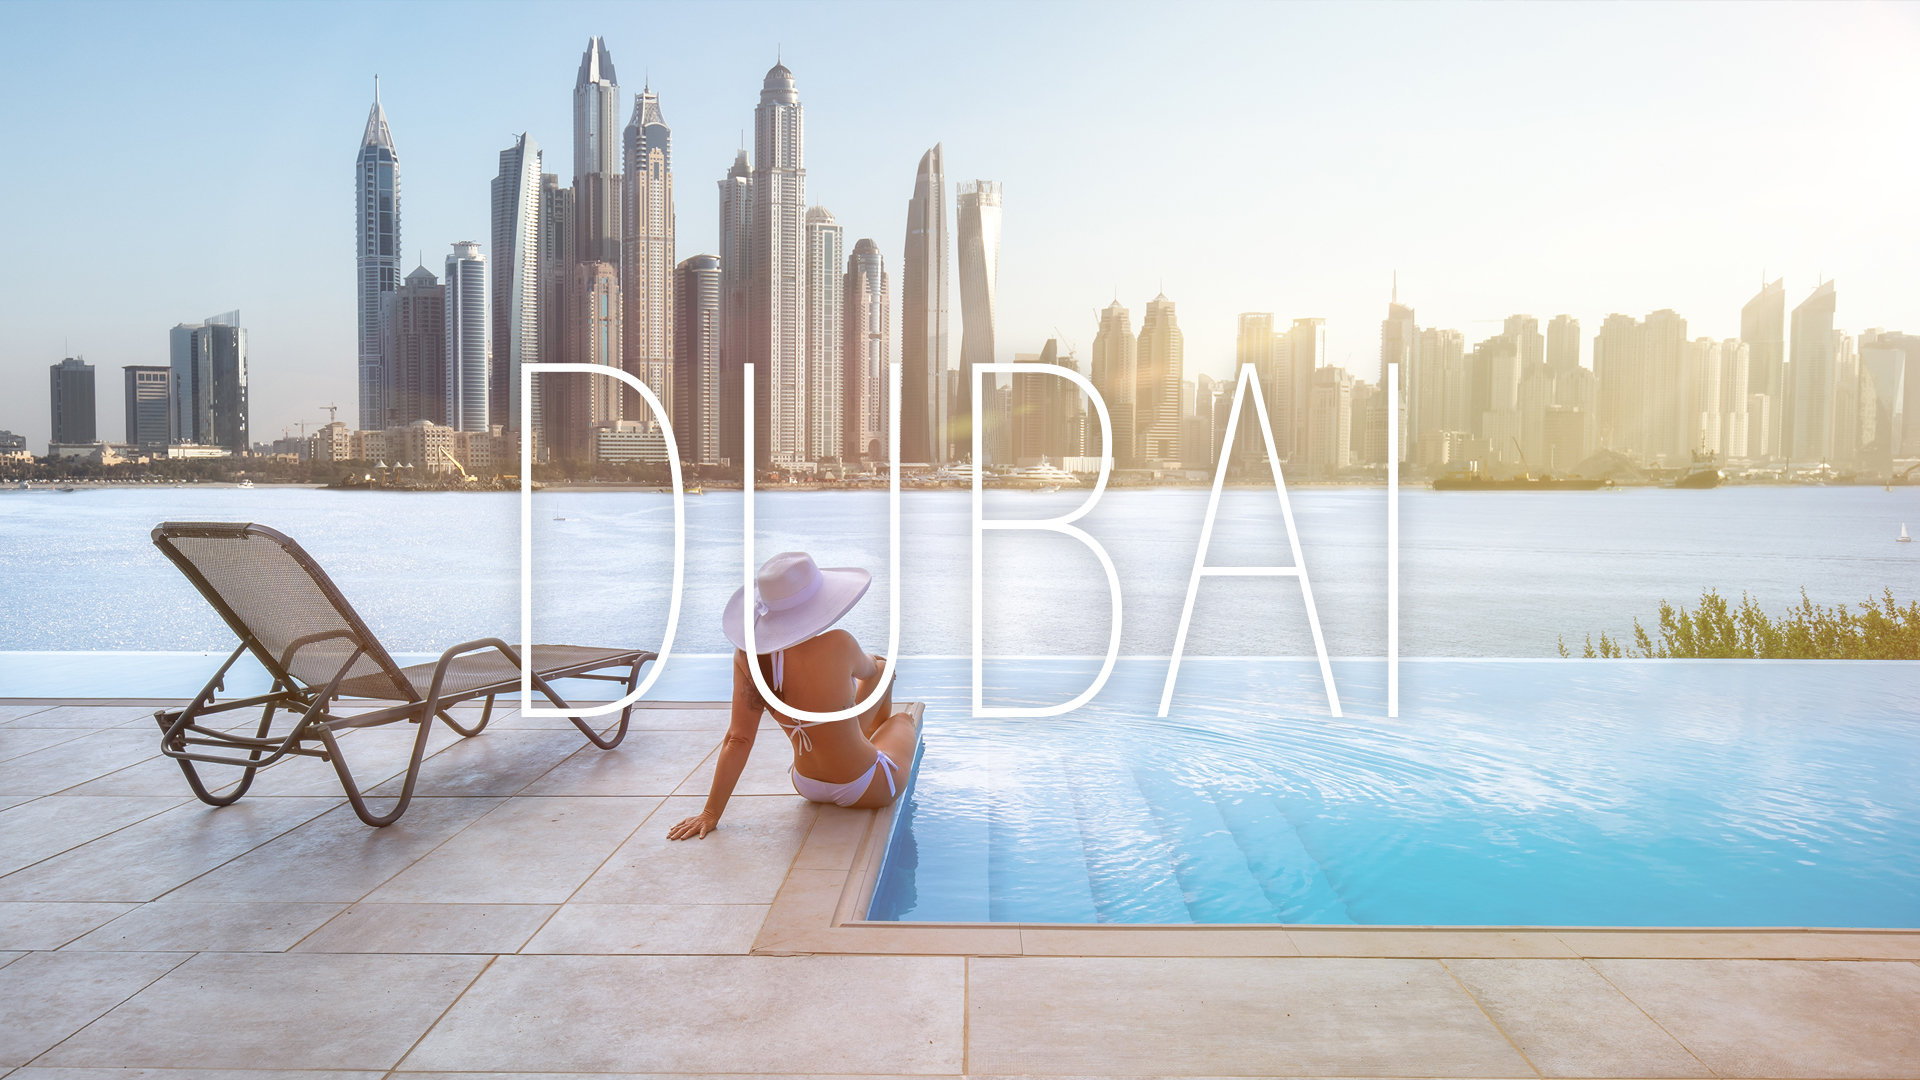 Dubai is a natural contender for those looking to live large after a thunderous score at the casino. Some say if it’s not in Dubai, it’s not worth doing.